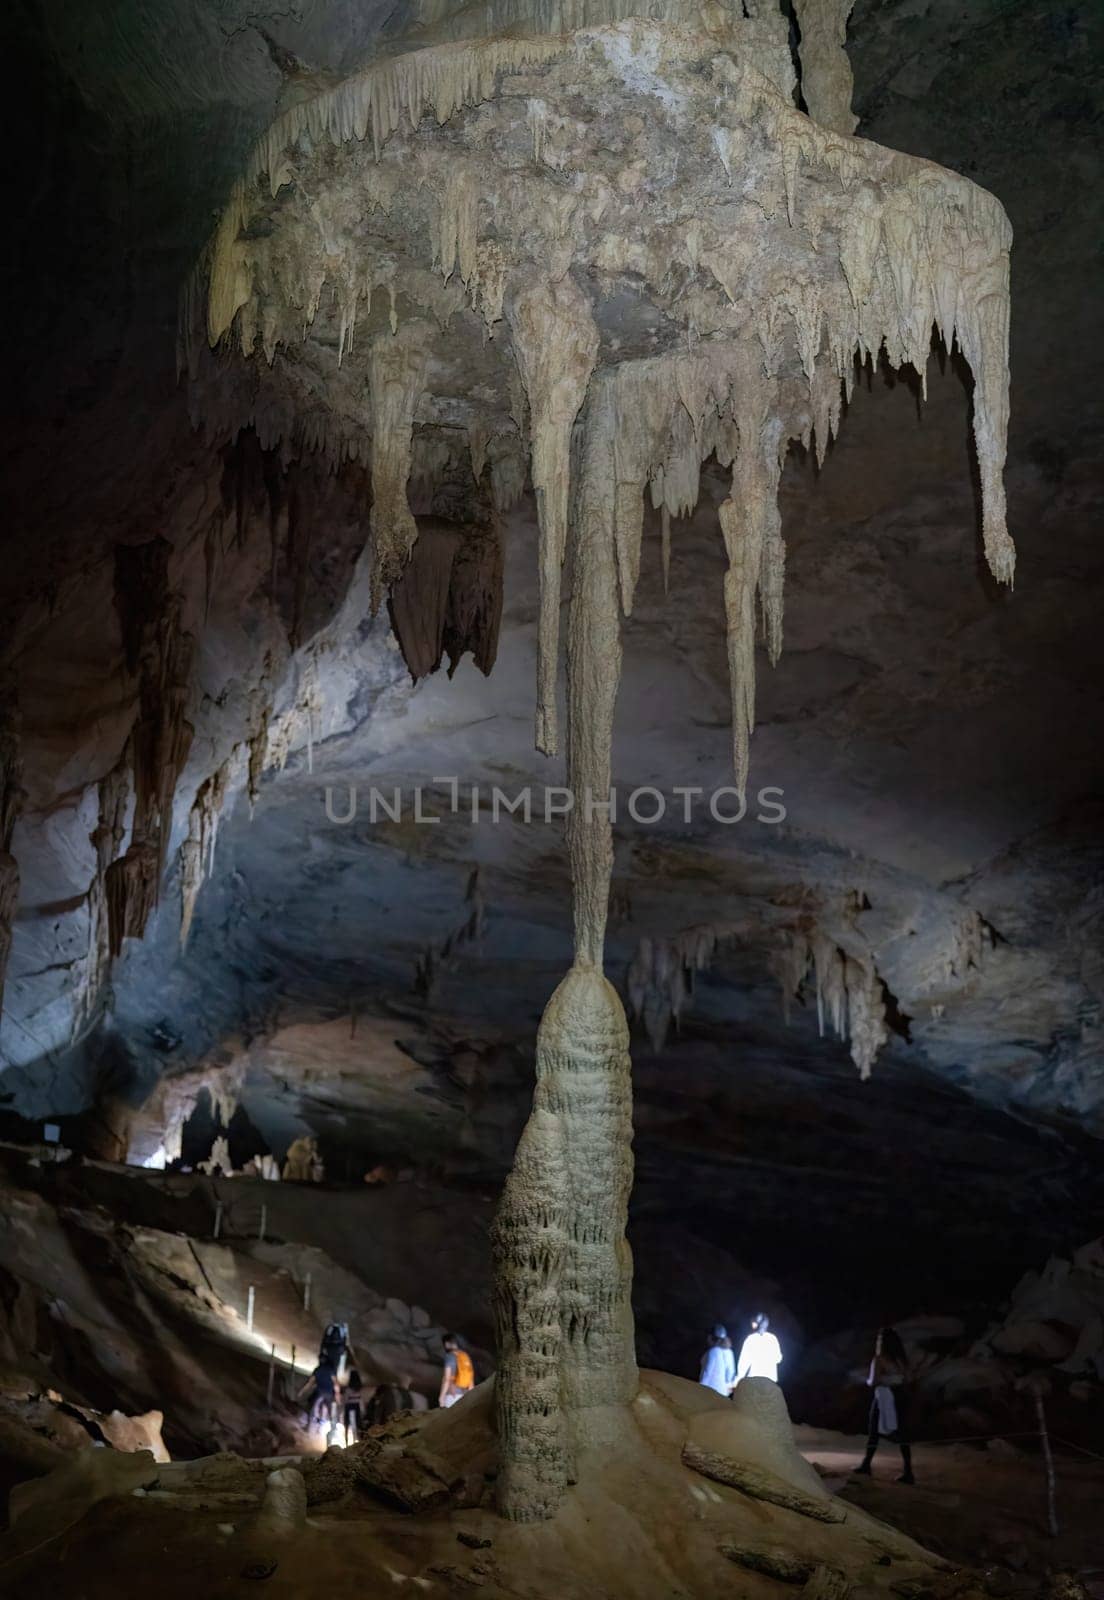 Tourists excited by union of stalactites and stalagmites in Lamp Union. by FerradalFCG